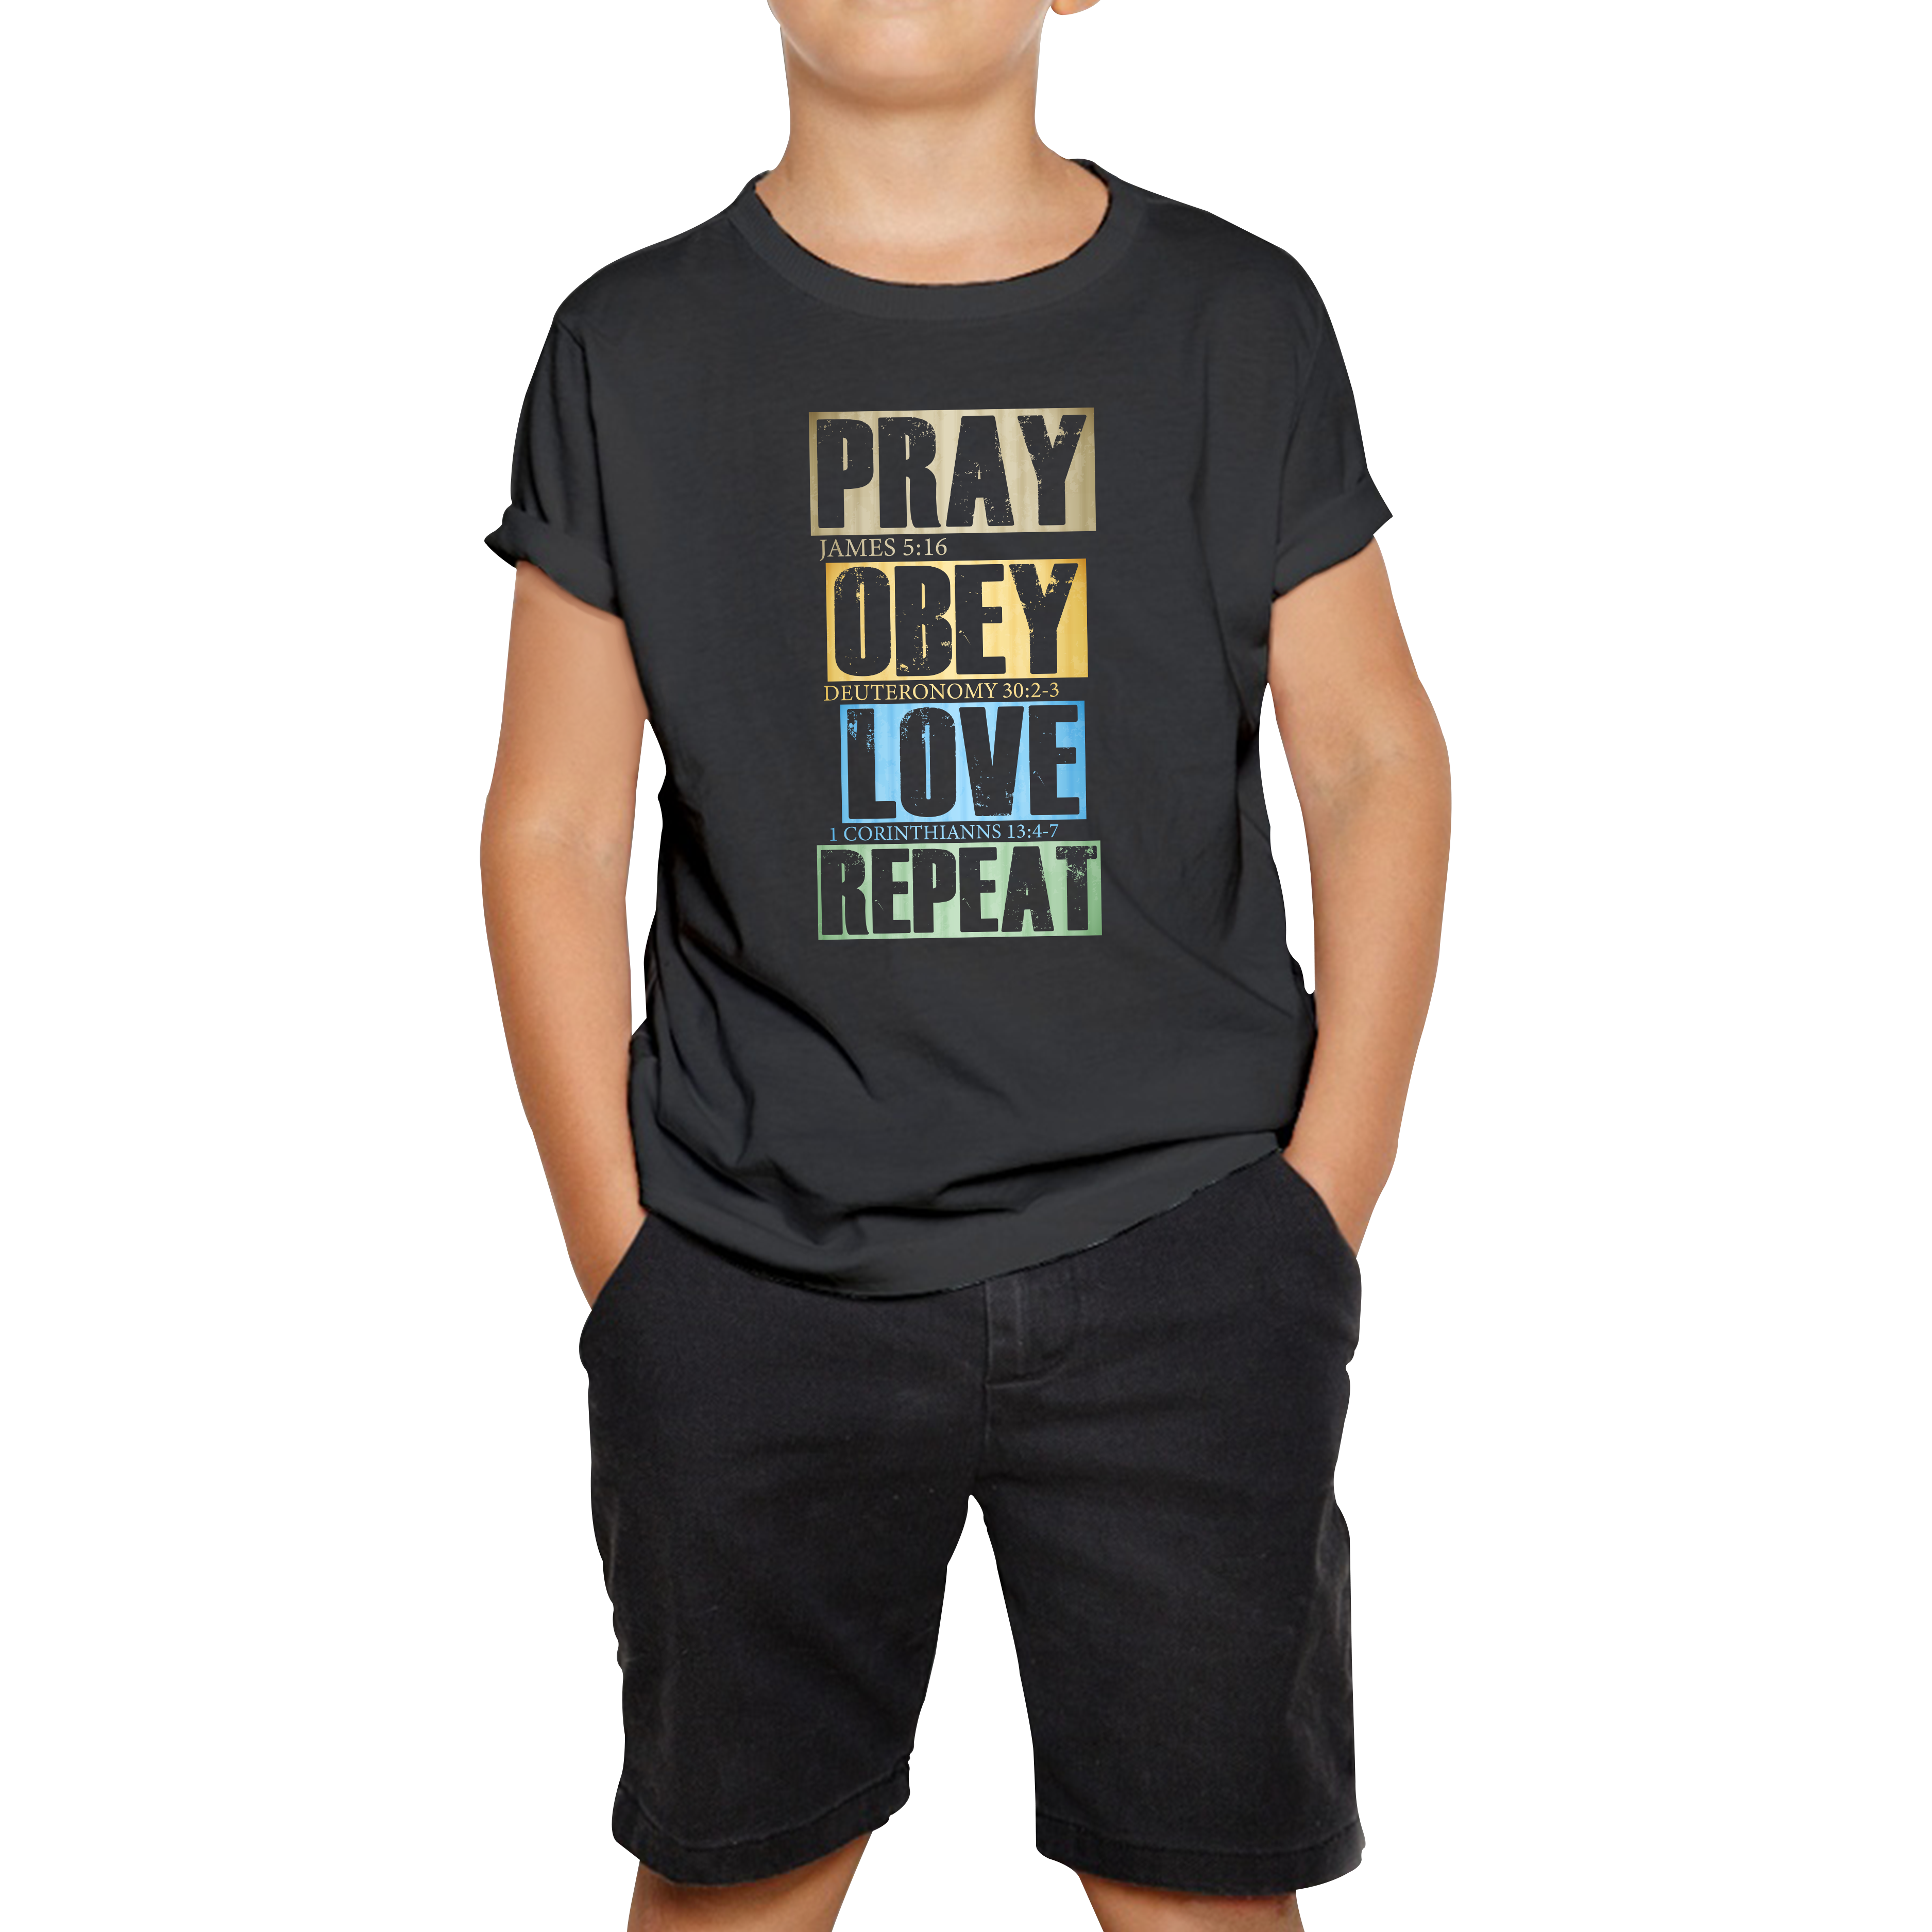 Pray Obey Love Repeat Vintage Christian Bible Christianity Kids Tee